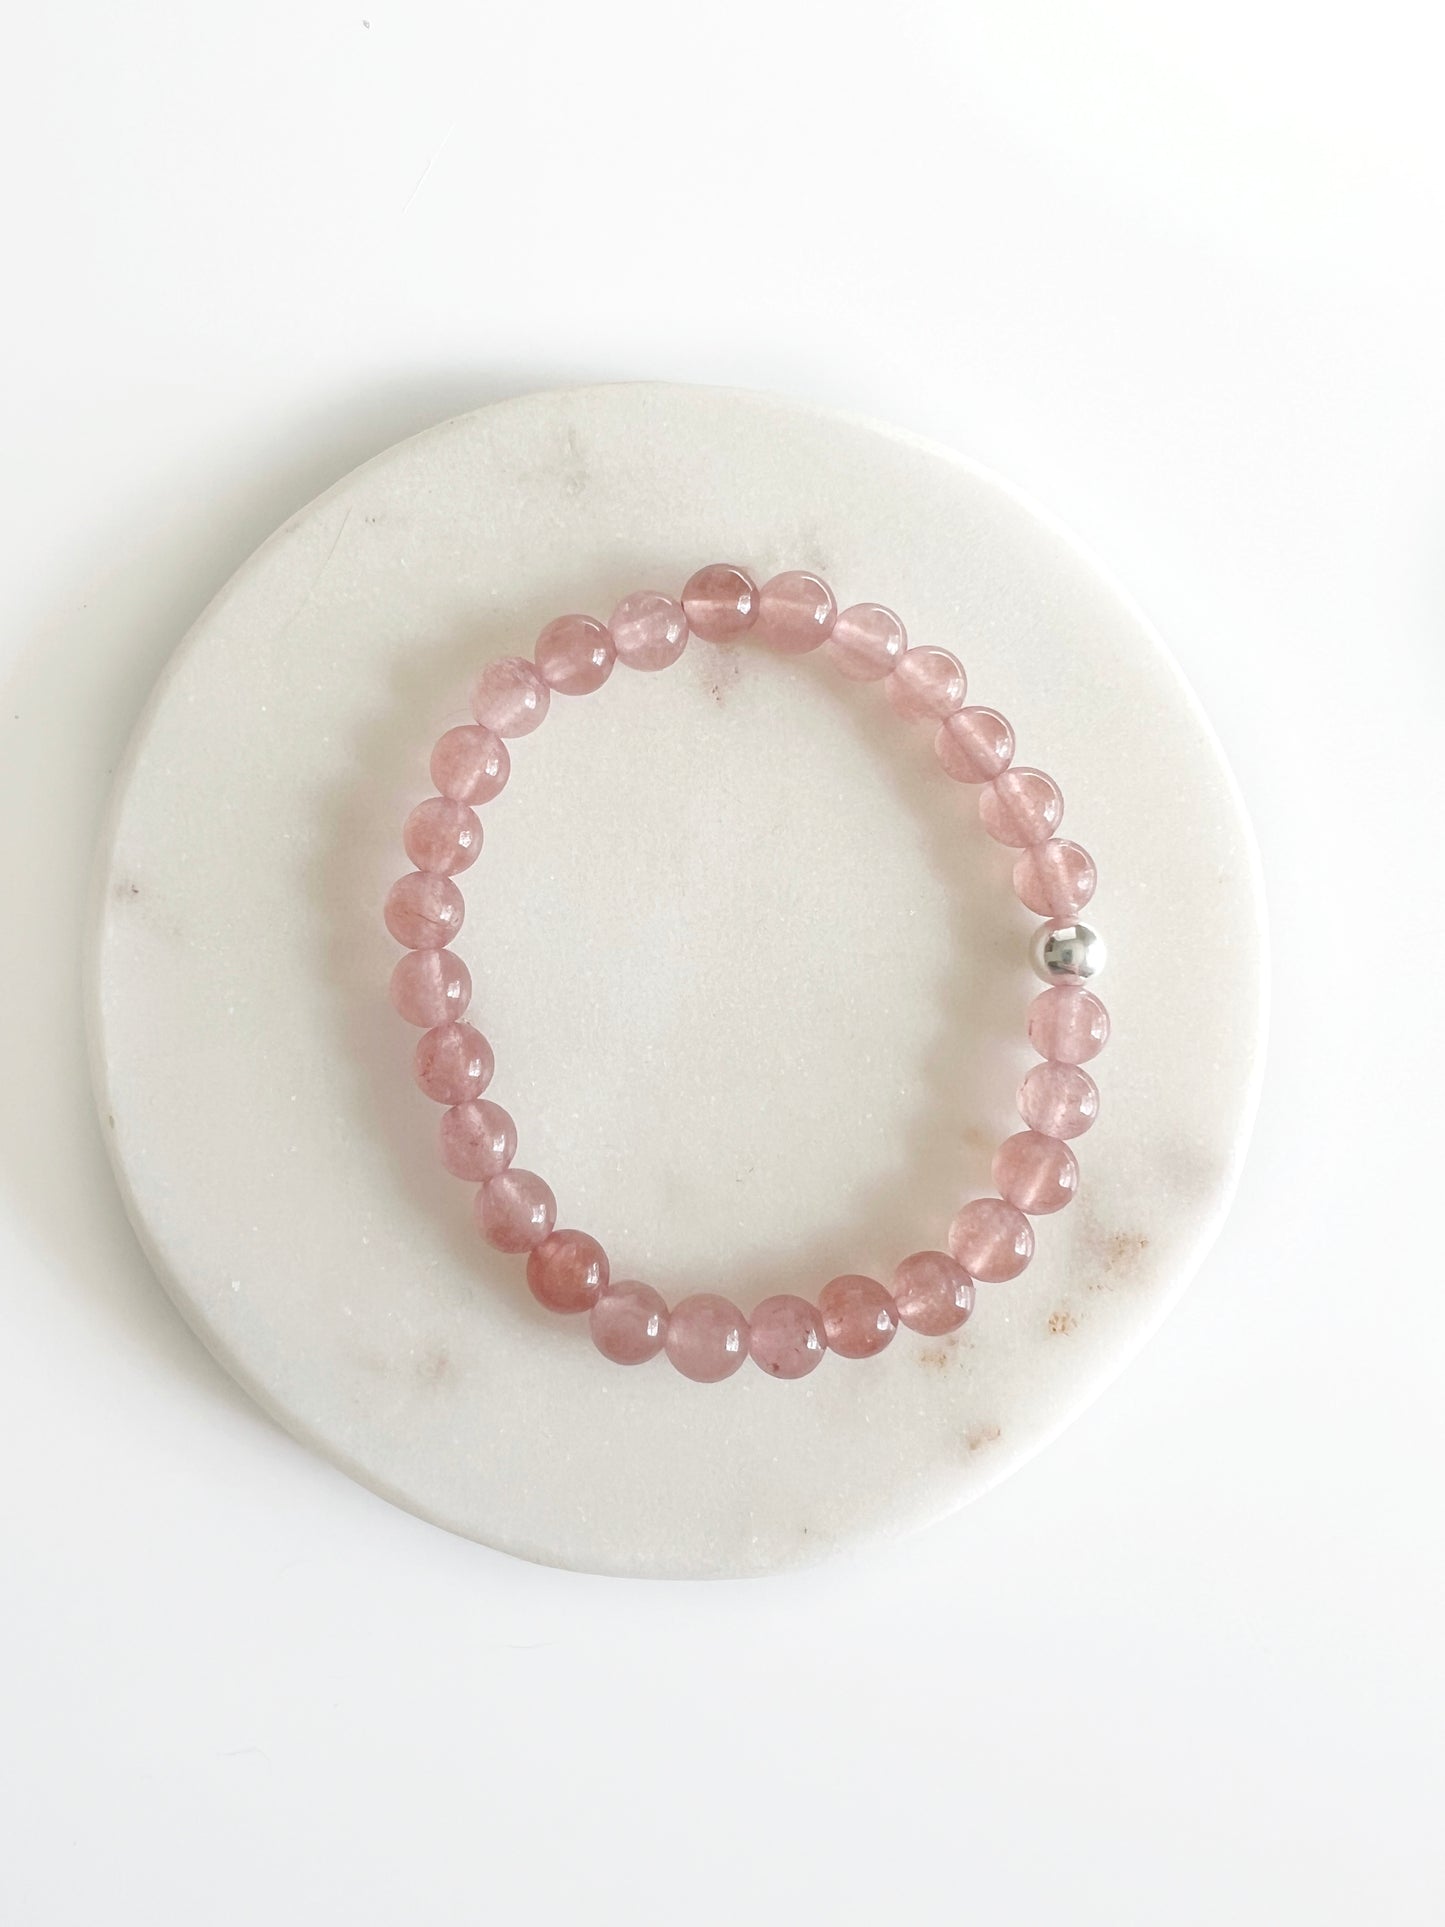 Strawberry Quartz stretch bracelet with one silver bead. Each bead is dark translucent pink. It's sitting on a small flat white dish.